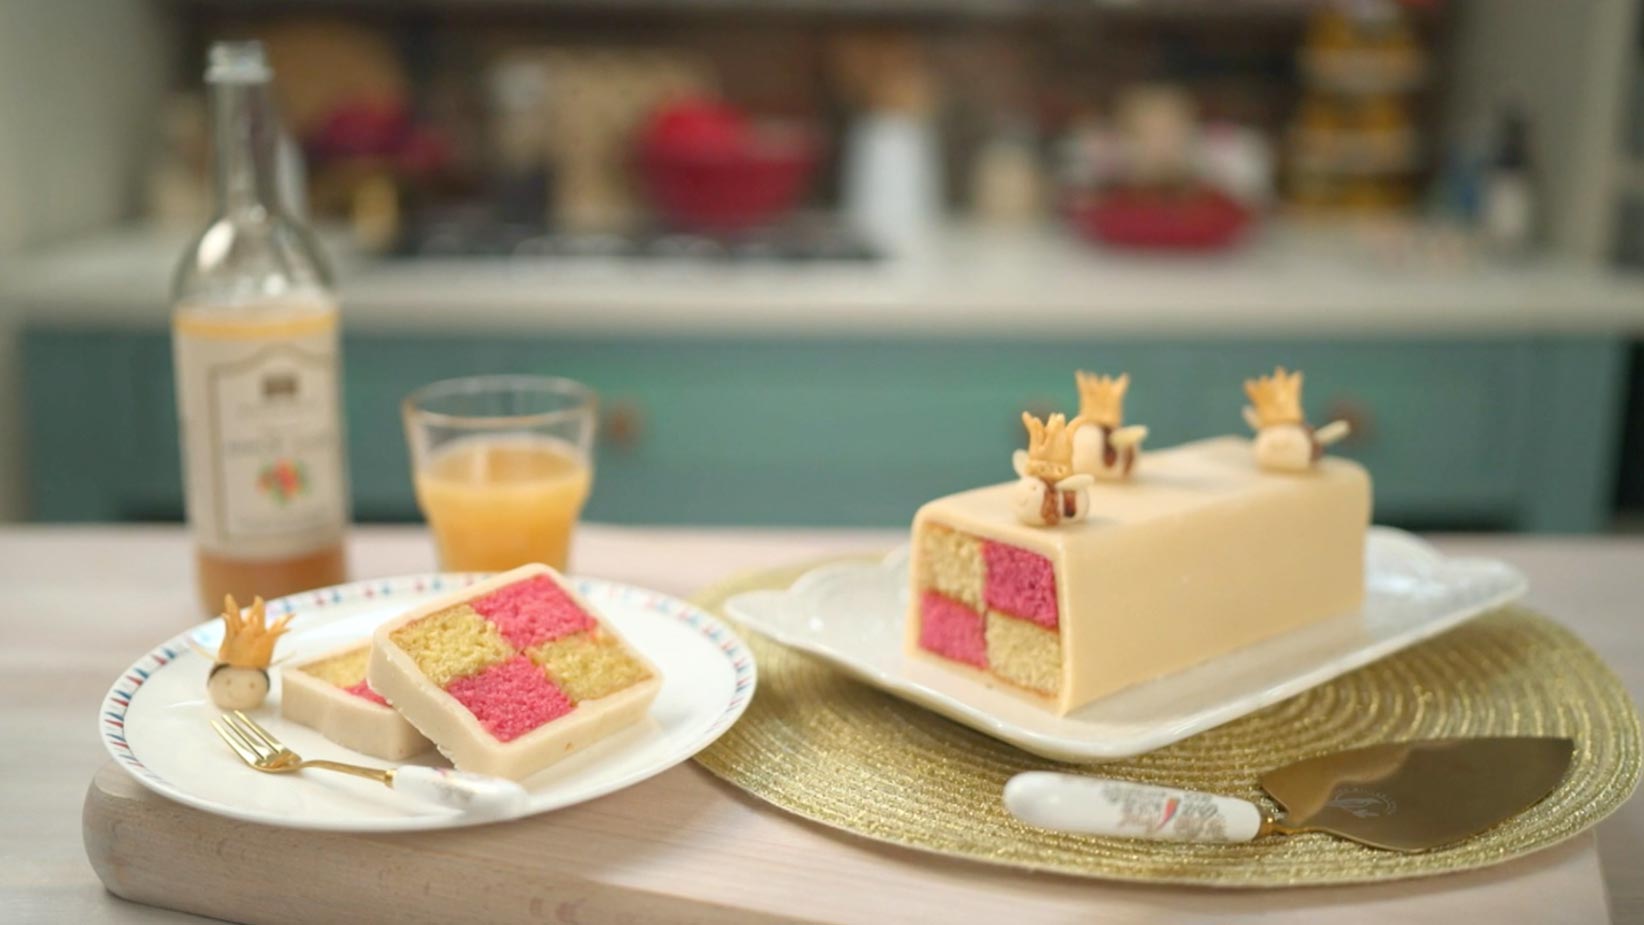 Battenberg Cake  We Are Tate and Lyle Sugars